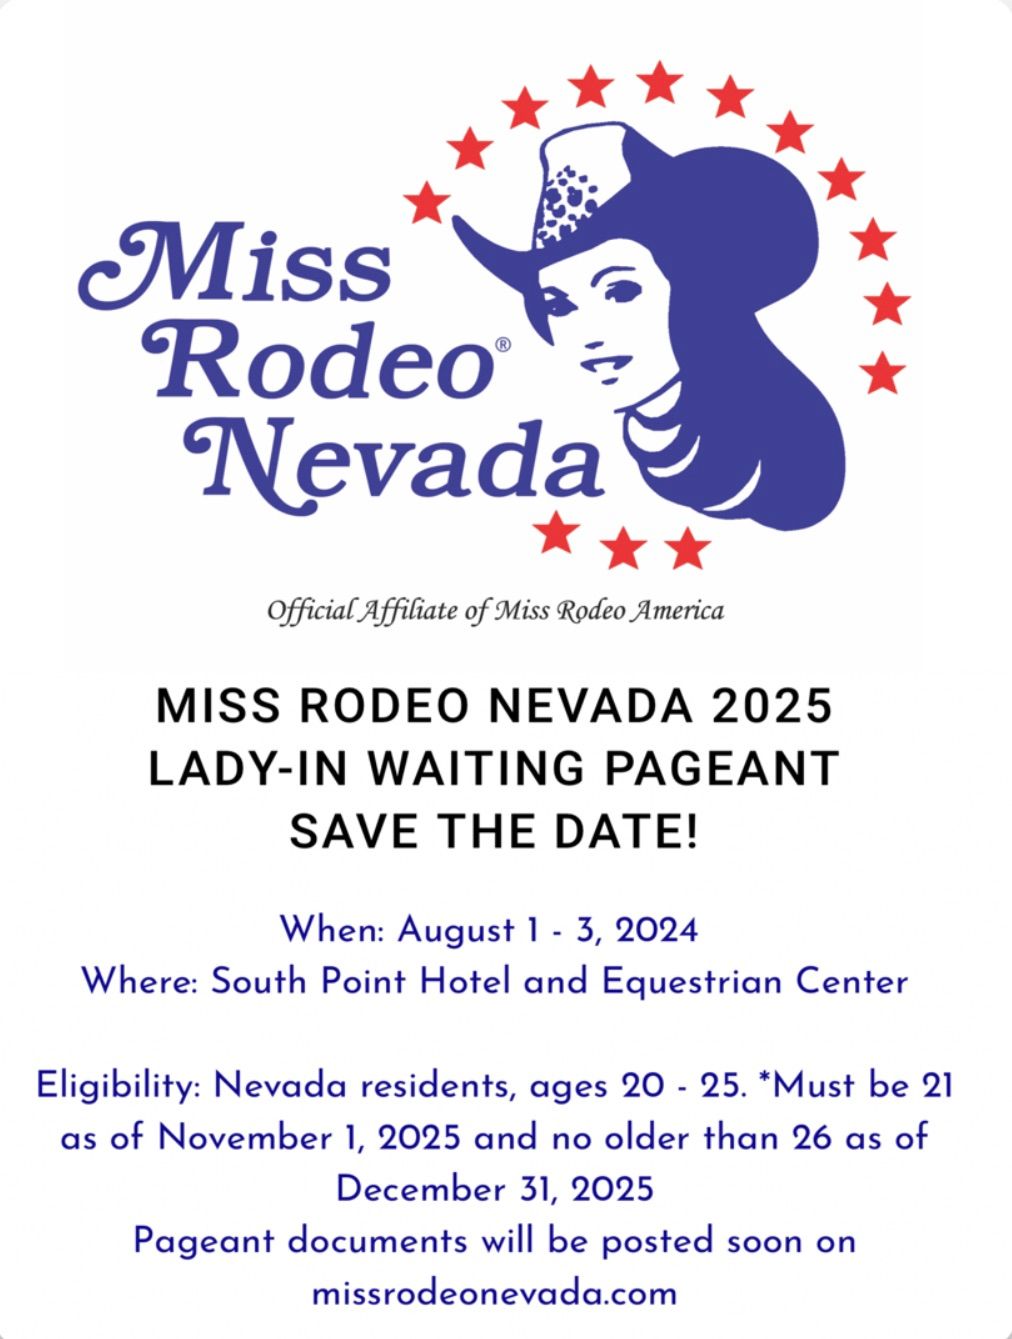 Miss Rodeo Nevada 2025 Lady in Waiting Pageant